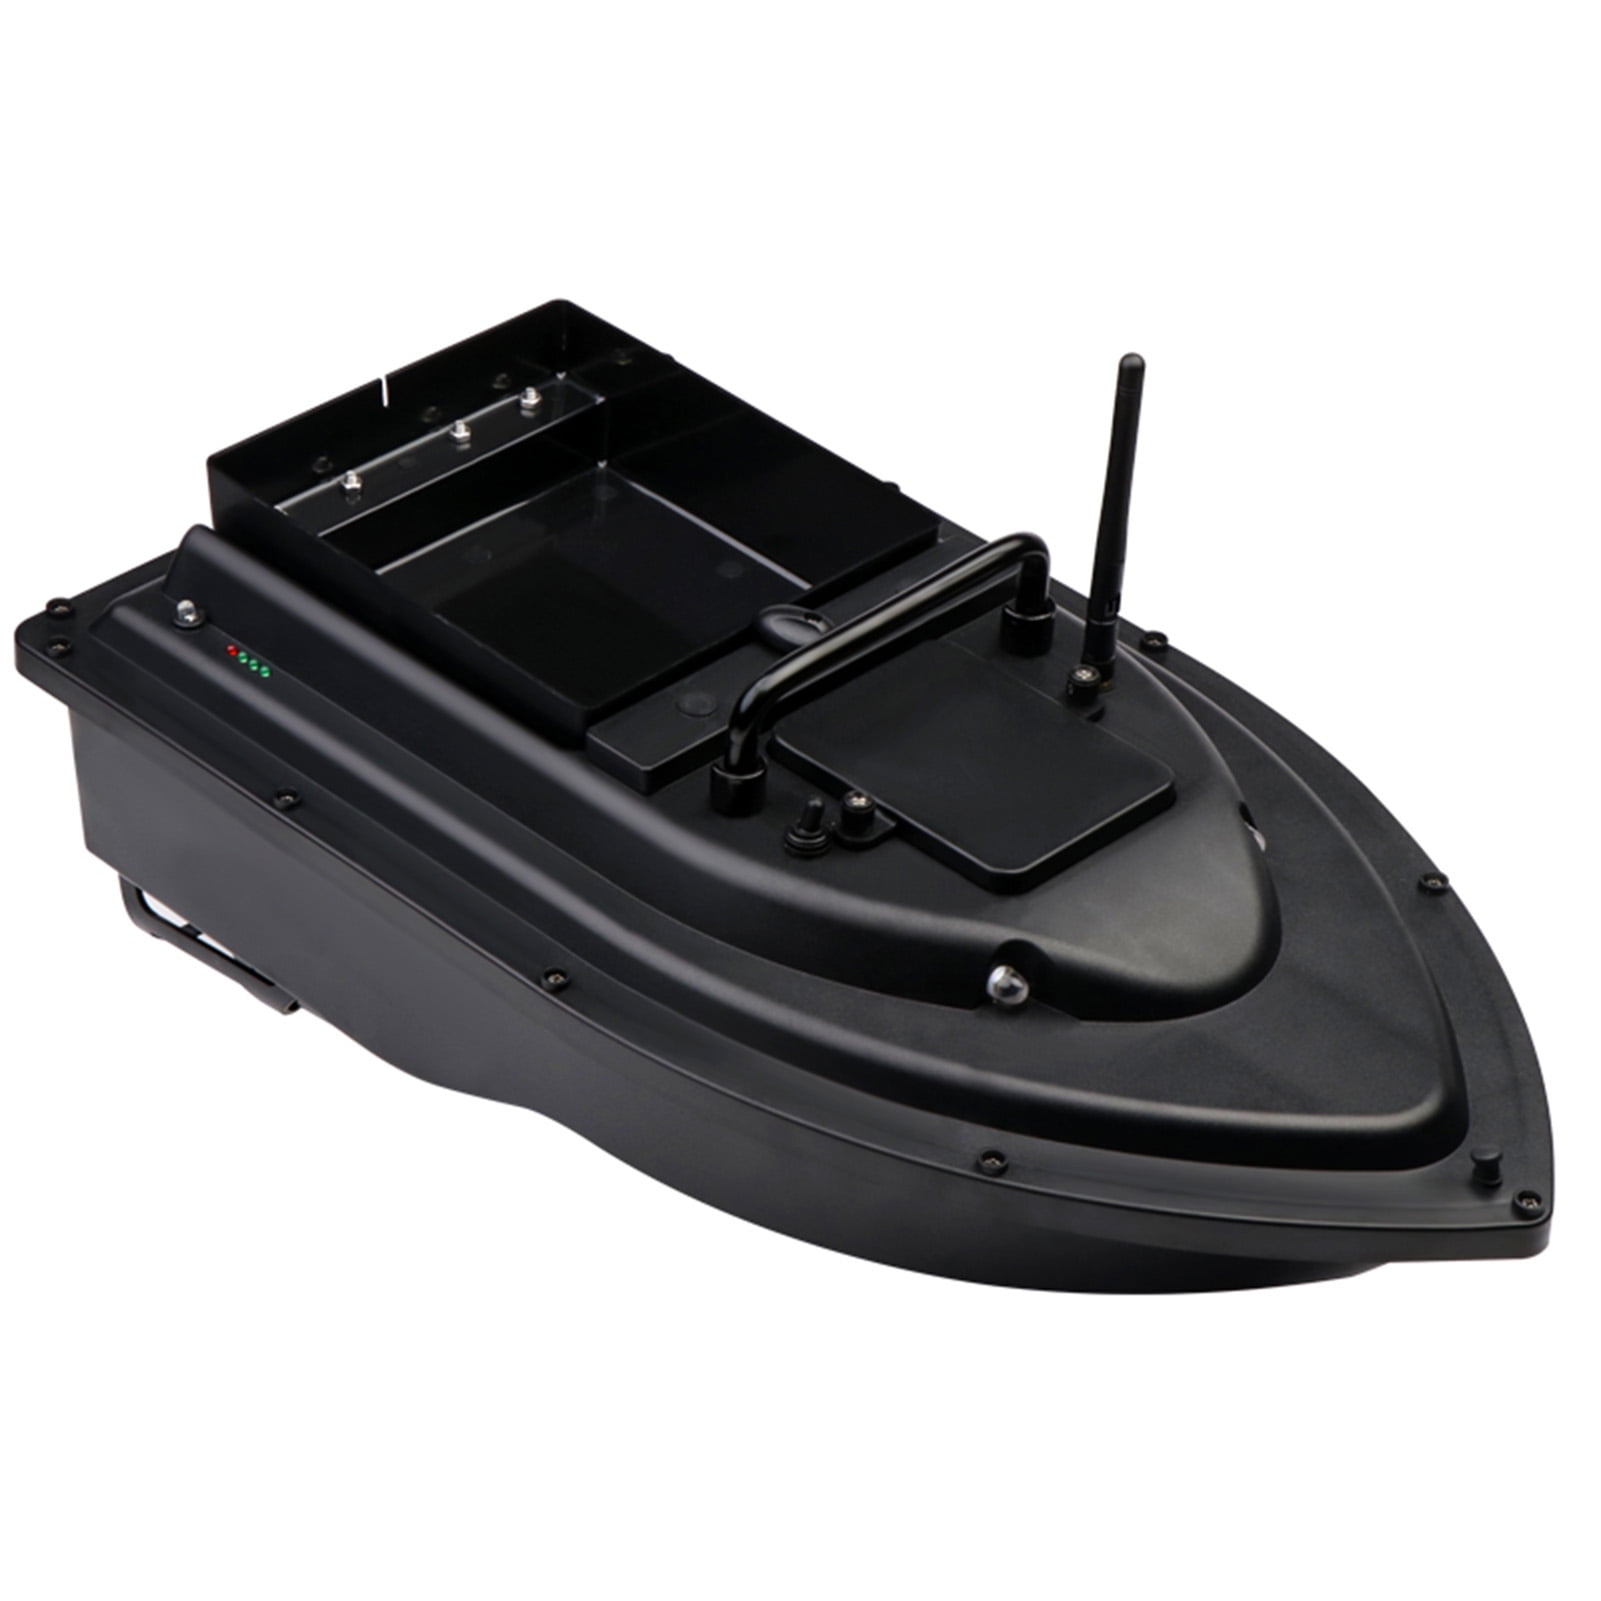 Gps Rc Fish Bait Boat 8kg Load With 600m Remote Control Sea Fishing Bait  Boat [hy]